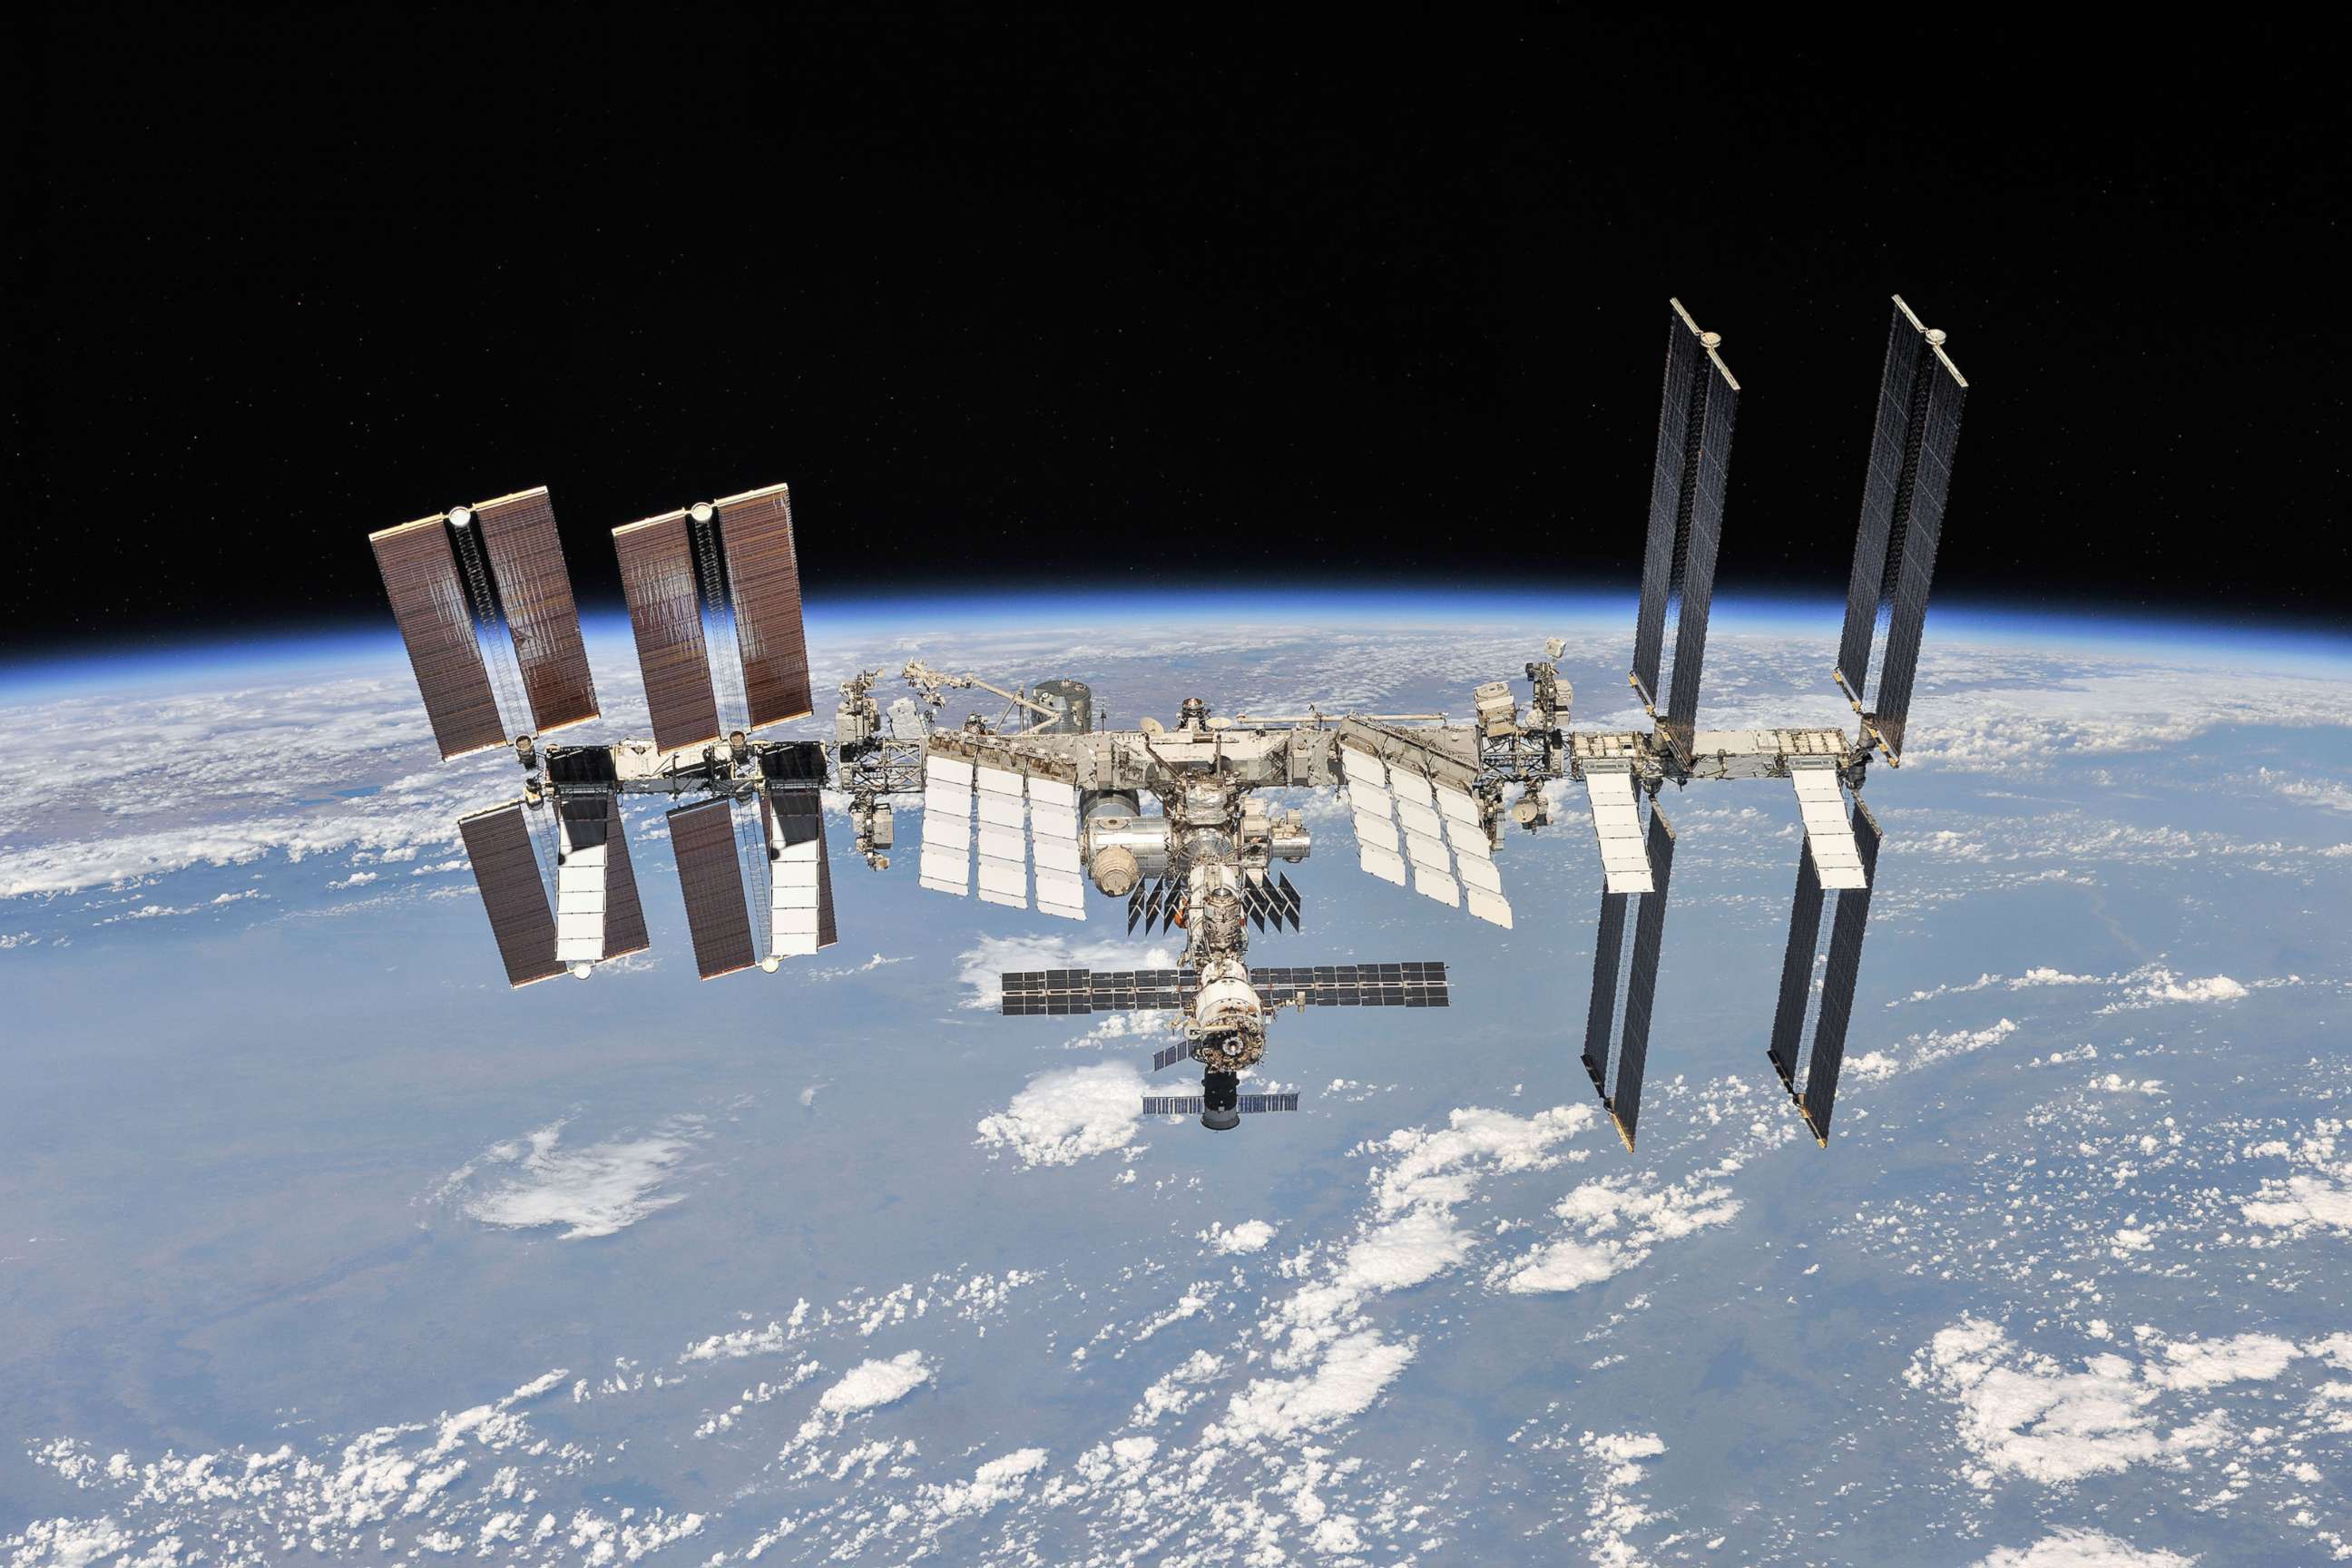 PHOTO: The International Space Station in low Earth orbit.